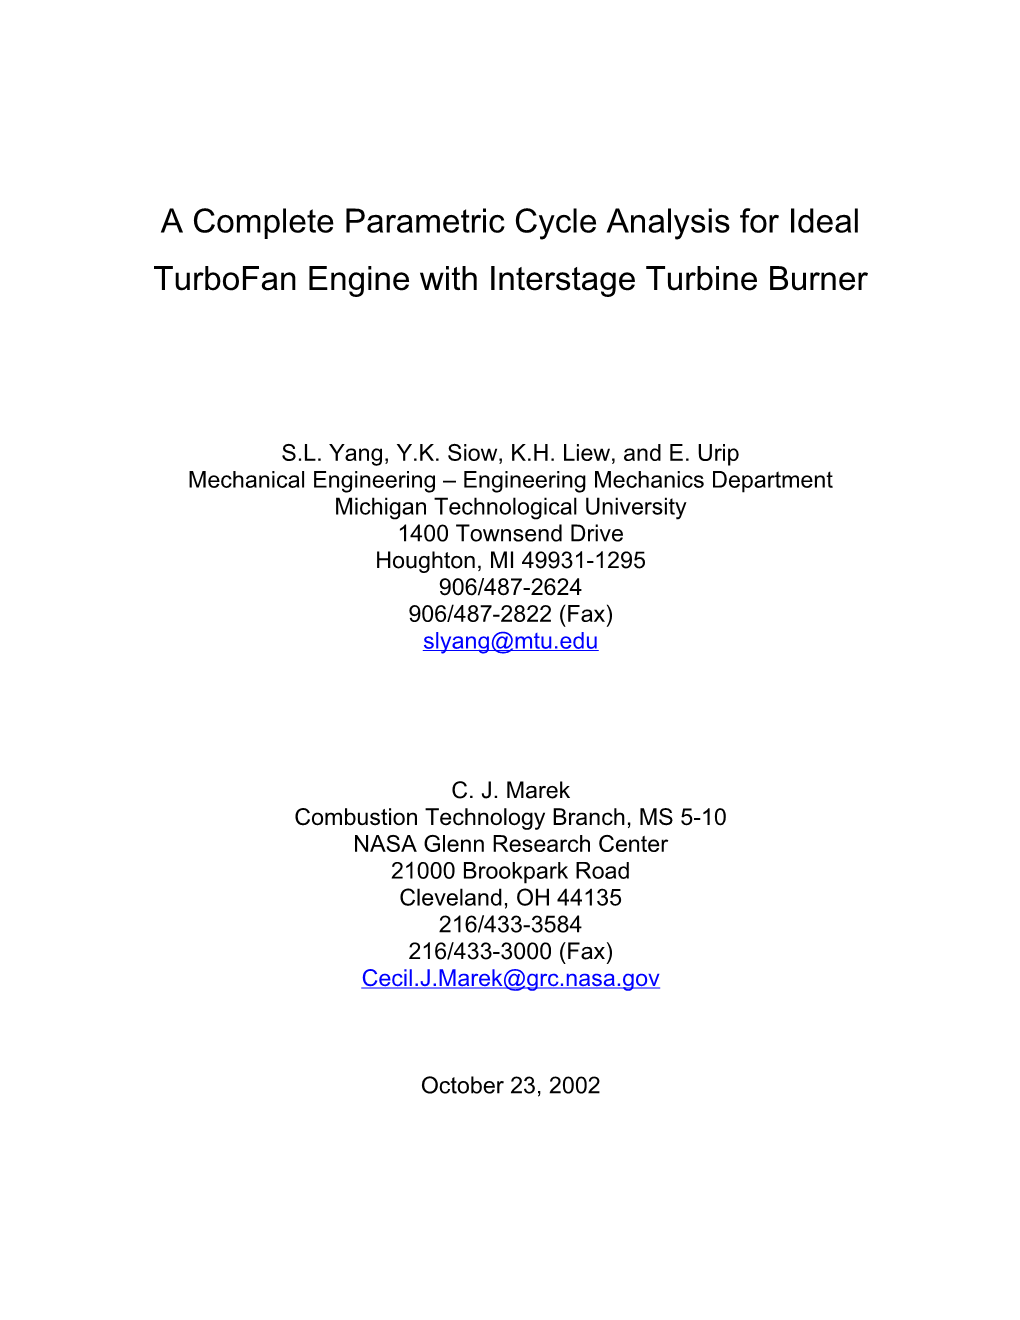 A Complete Parametric Cycle Analysis for Ideal Turbofan Engine with Interstage Turbine Burner